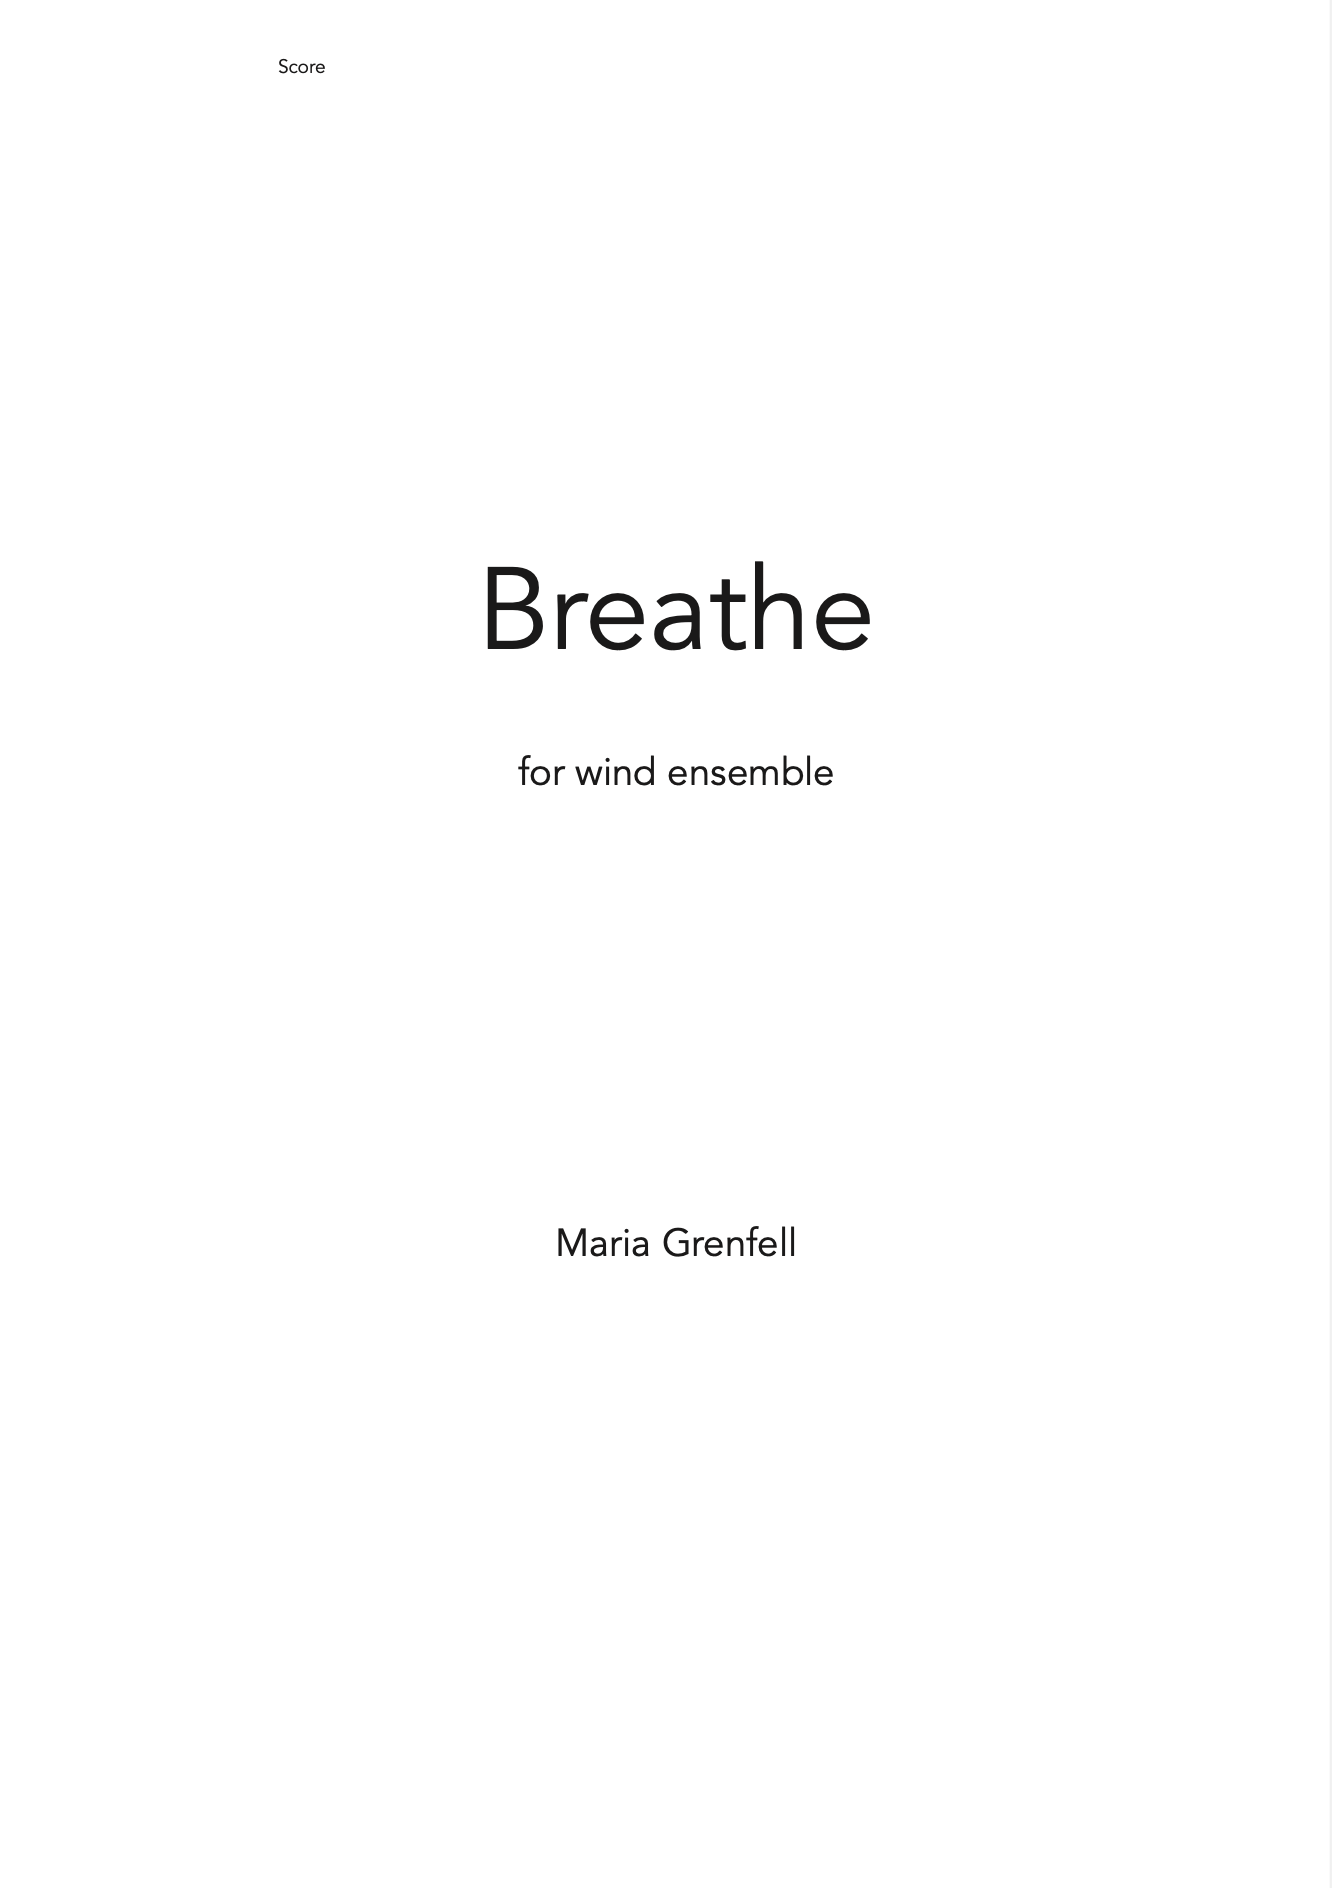 Breathe by Maria Grenfell